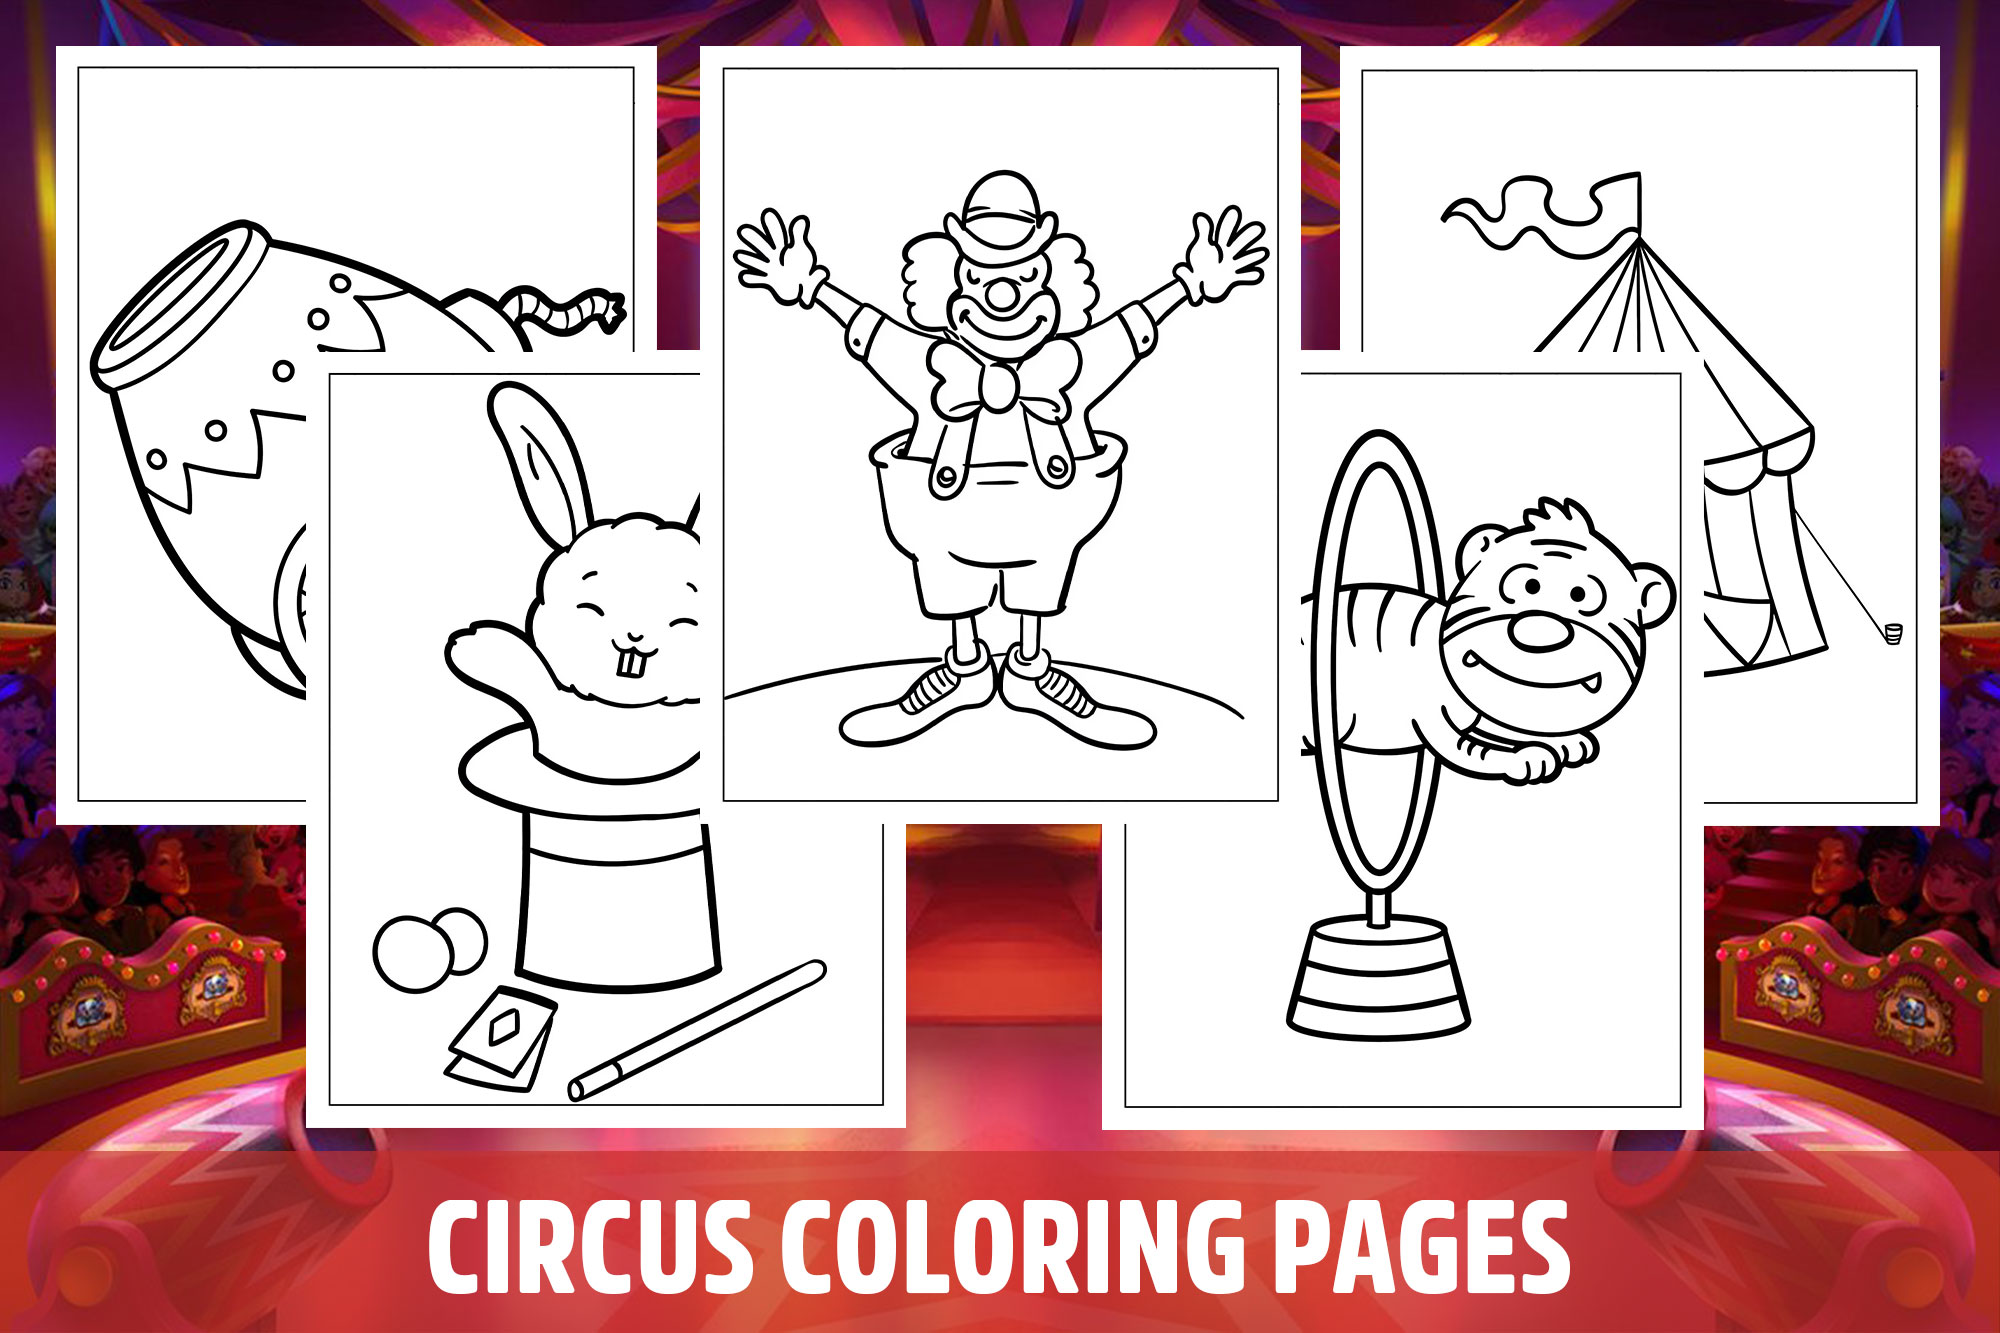 Circus coloring pages for kids girls boys teens birthday school activity made by teachers